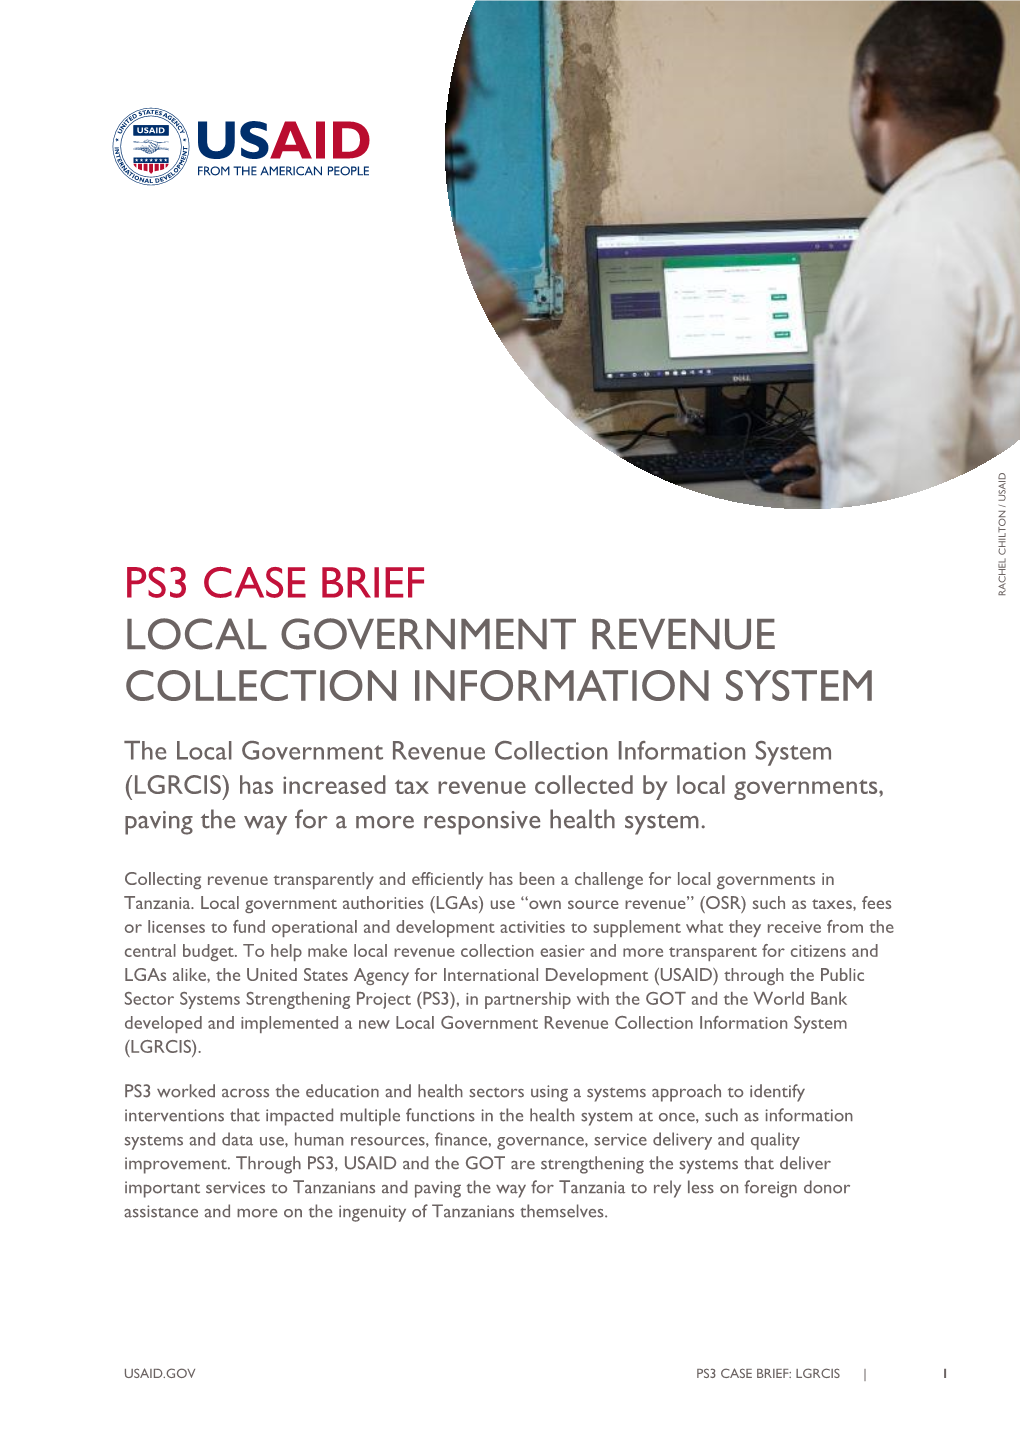 PS3 Case Brief Local Government Revenue Collection Information